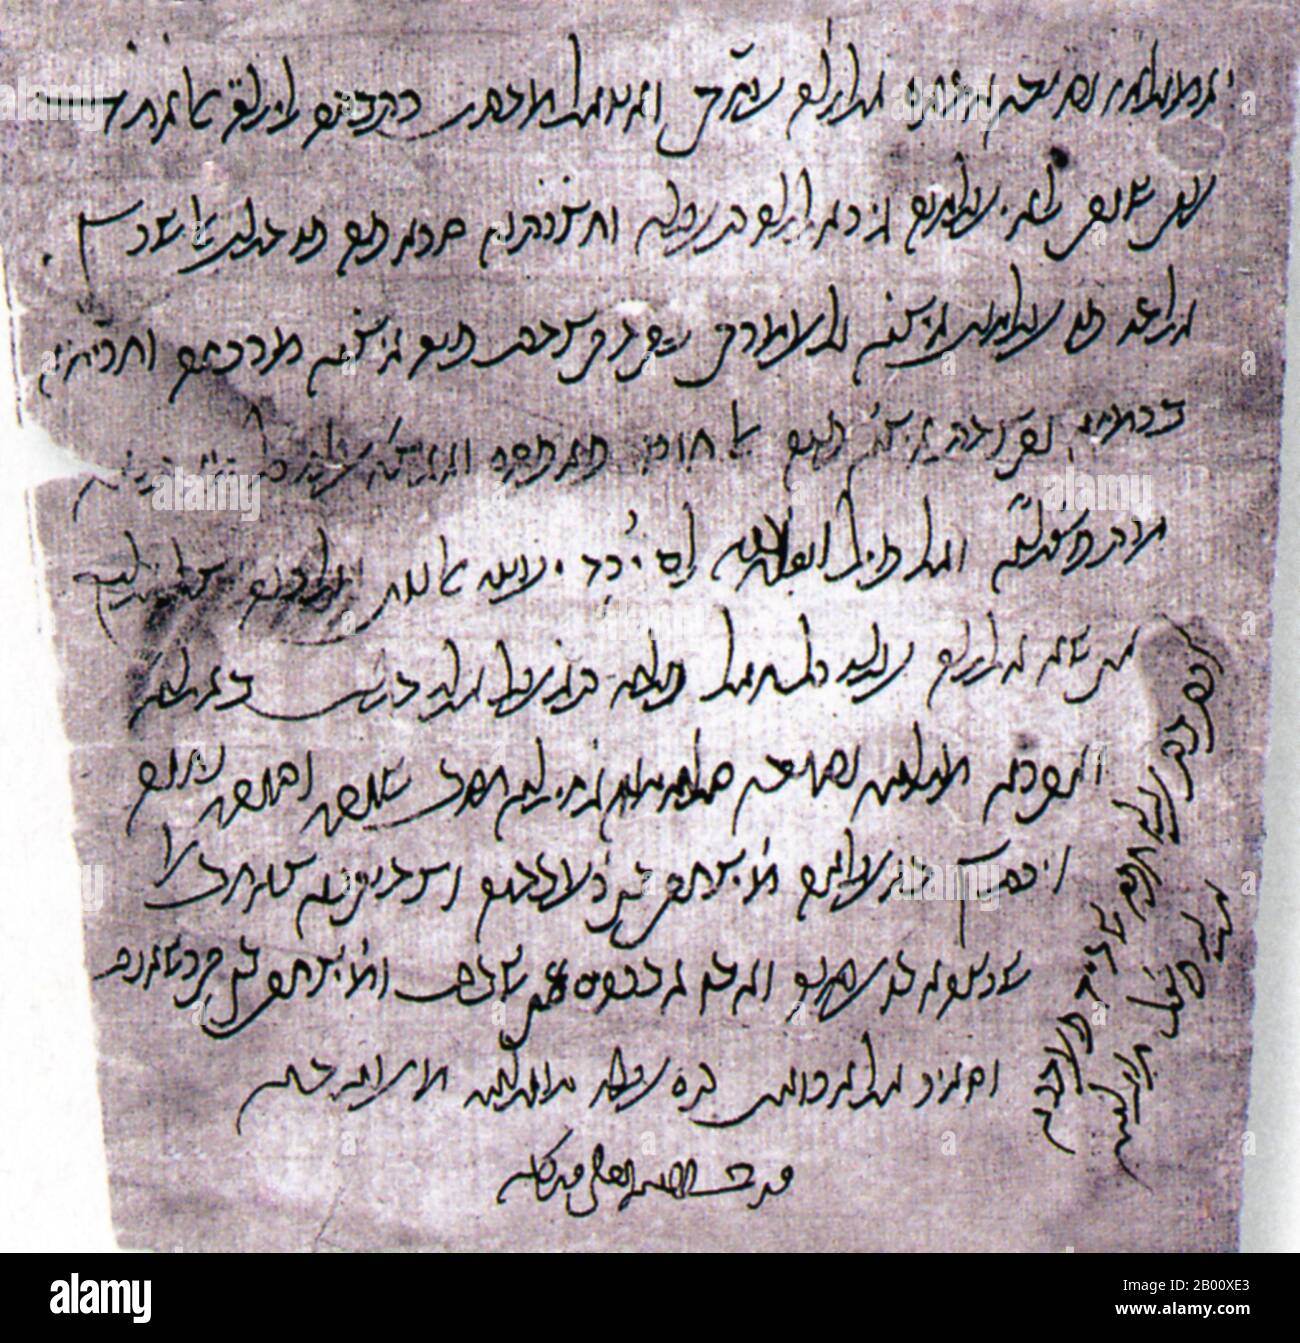 Palestine/Israel/Egypt: Written in Arabic, using the Hebrew alphabet, this ‘thank you letter’ is one of the thousands of paper documents found in the Cairo Geniza in 1896.   The Cairo Geniza is an accumulation of almost 280,000 Jewish manuscript fragments that were found in the ‘genizah’, or store room, of the Ben Ezra Synagogue in Fustat, presently Old Cairo. The documents were written from about 870 CE to as late as 1880. Stock Photo